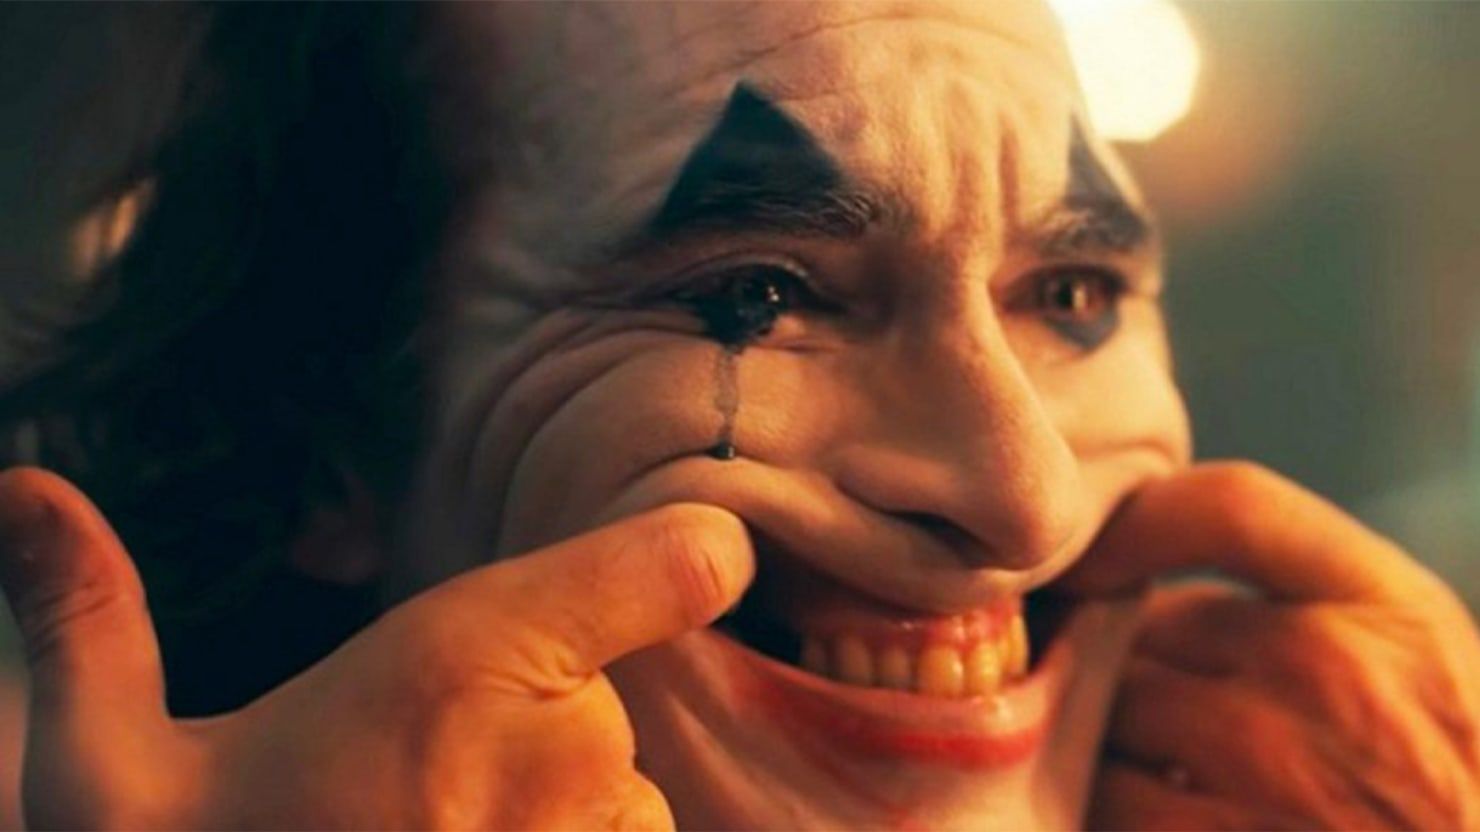 Everything About 'Joker' Is Absolutely Infuriating